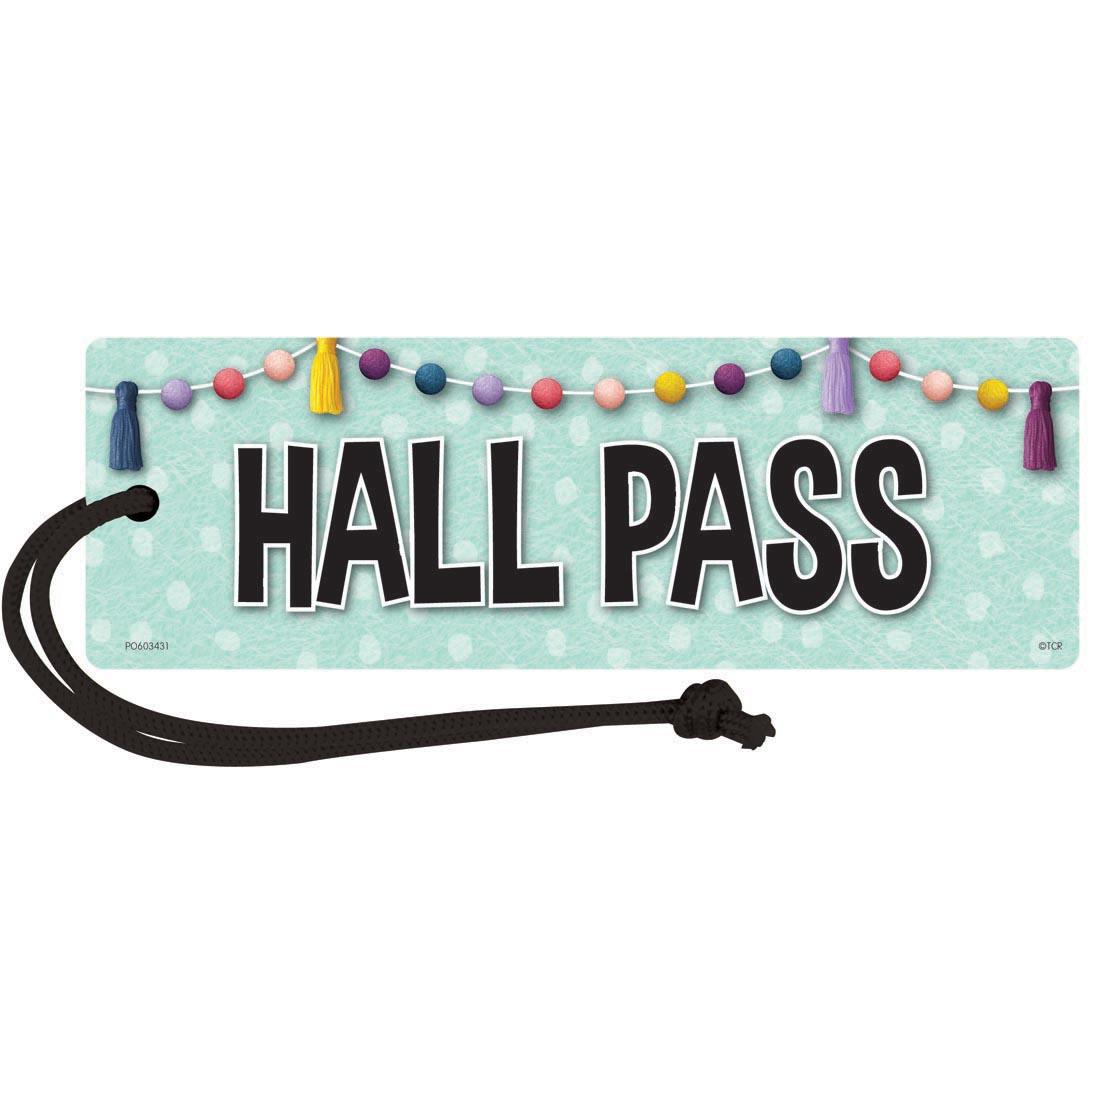 Magnetic Hall Pass from the Oh Happy Day collection by Teacher Created Resources